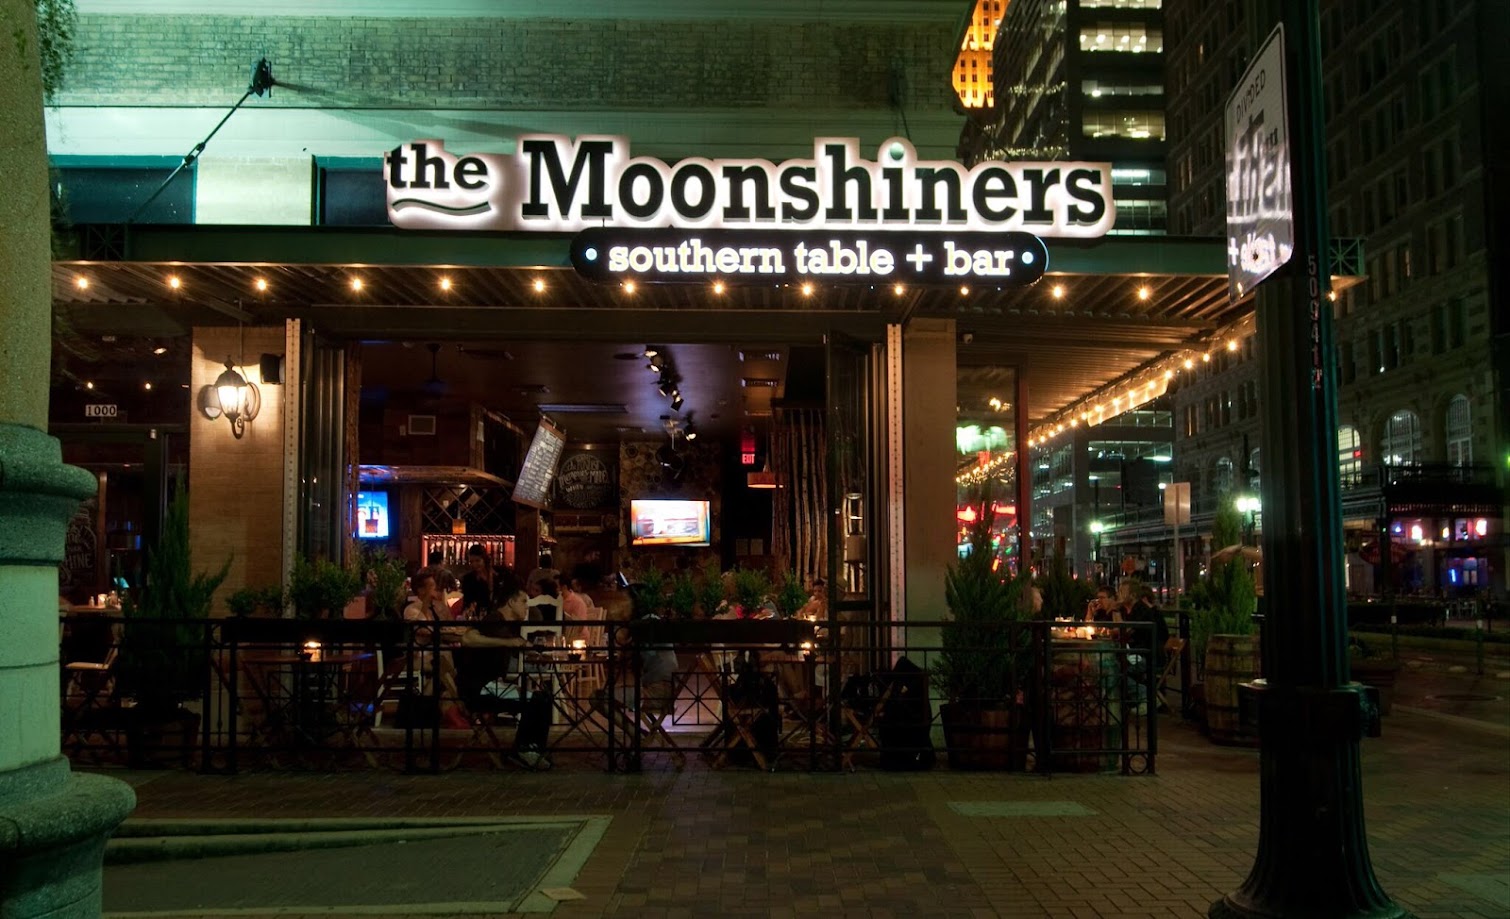 The Moonshiners Southern Table + Bar